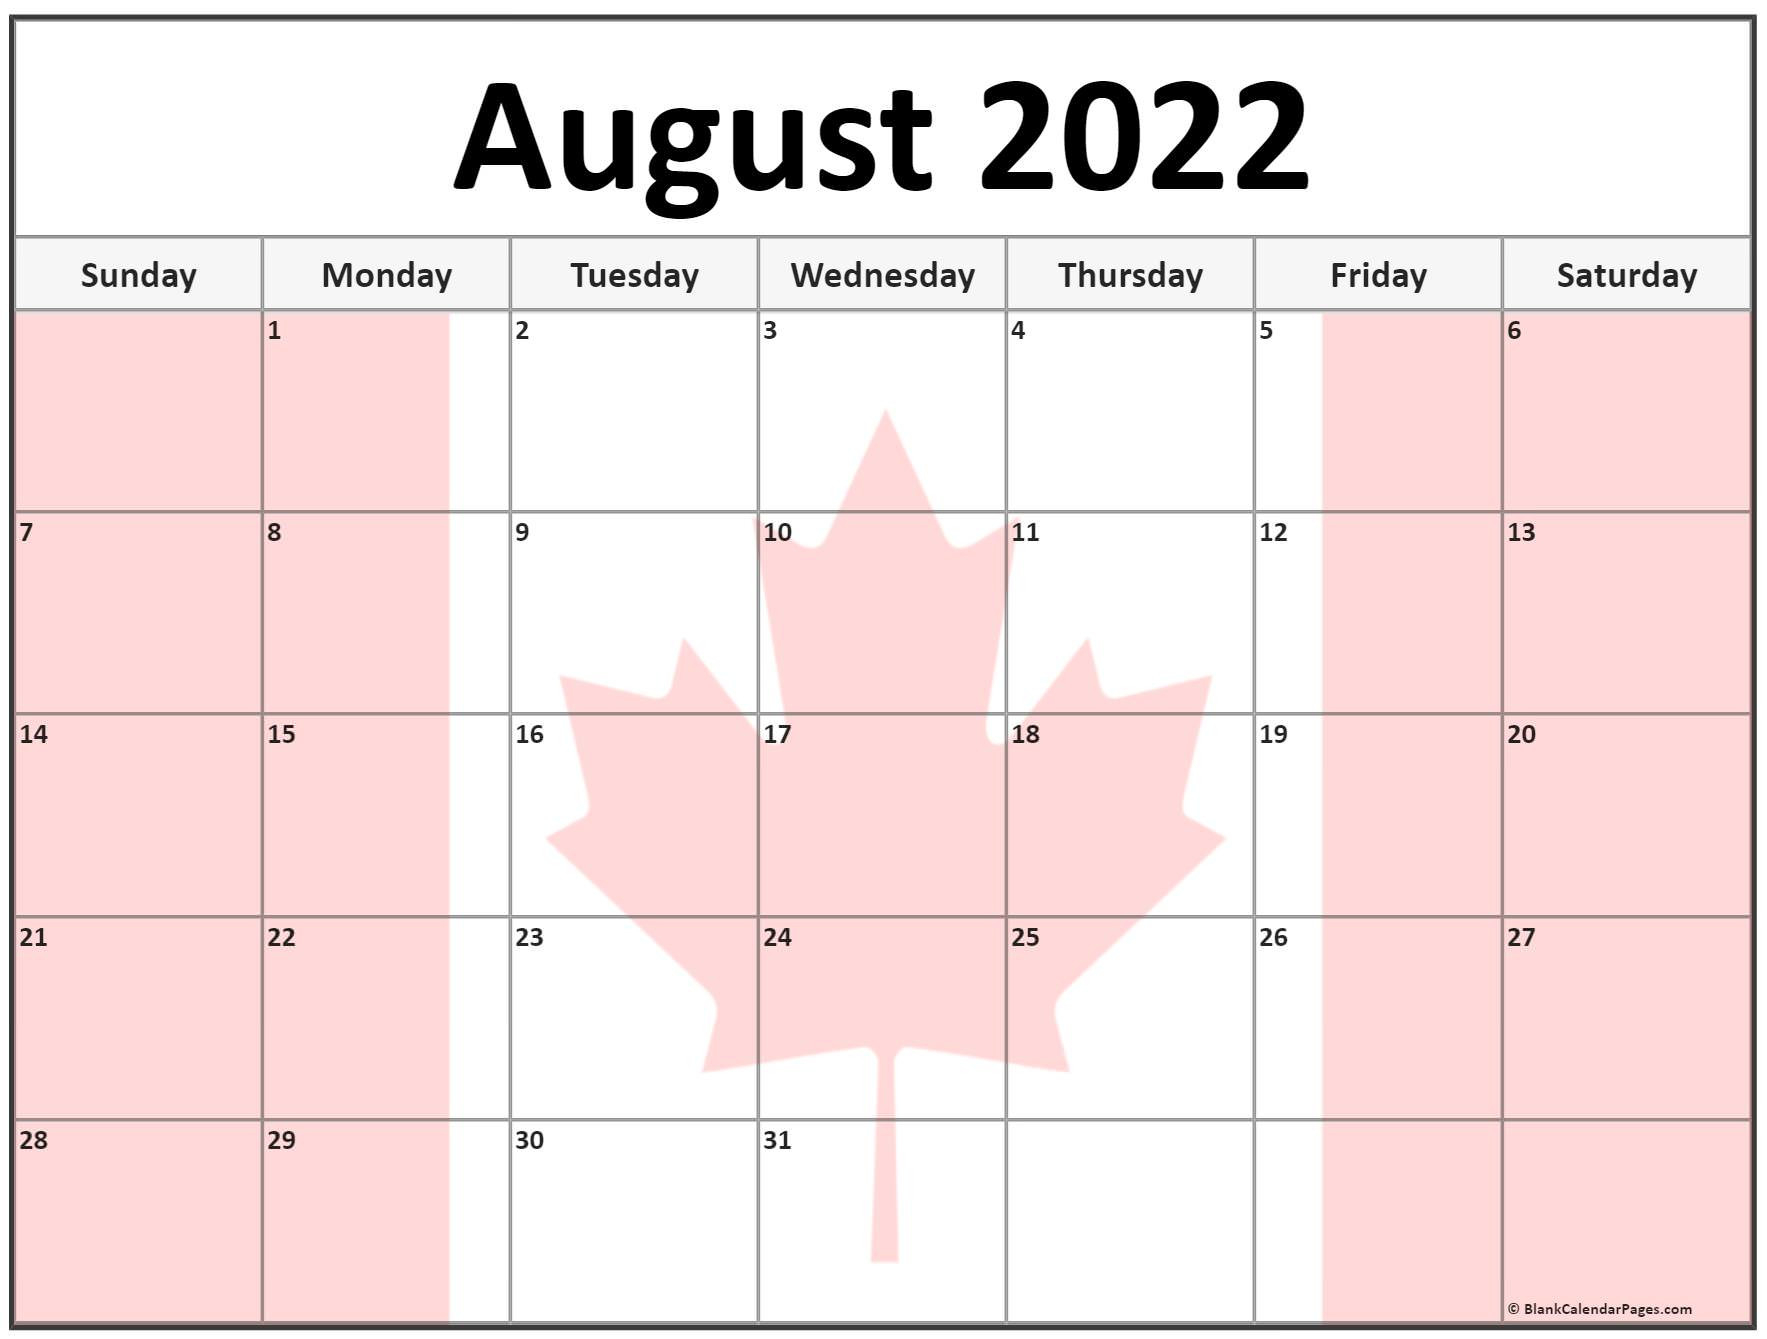 Collection Of August 2022 Photo Calendars With Image Filters.  Astronomy Picture Of The Day Calendar August 2022